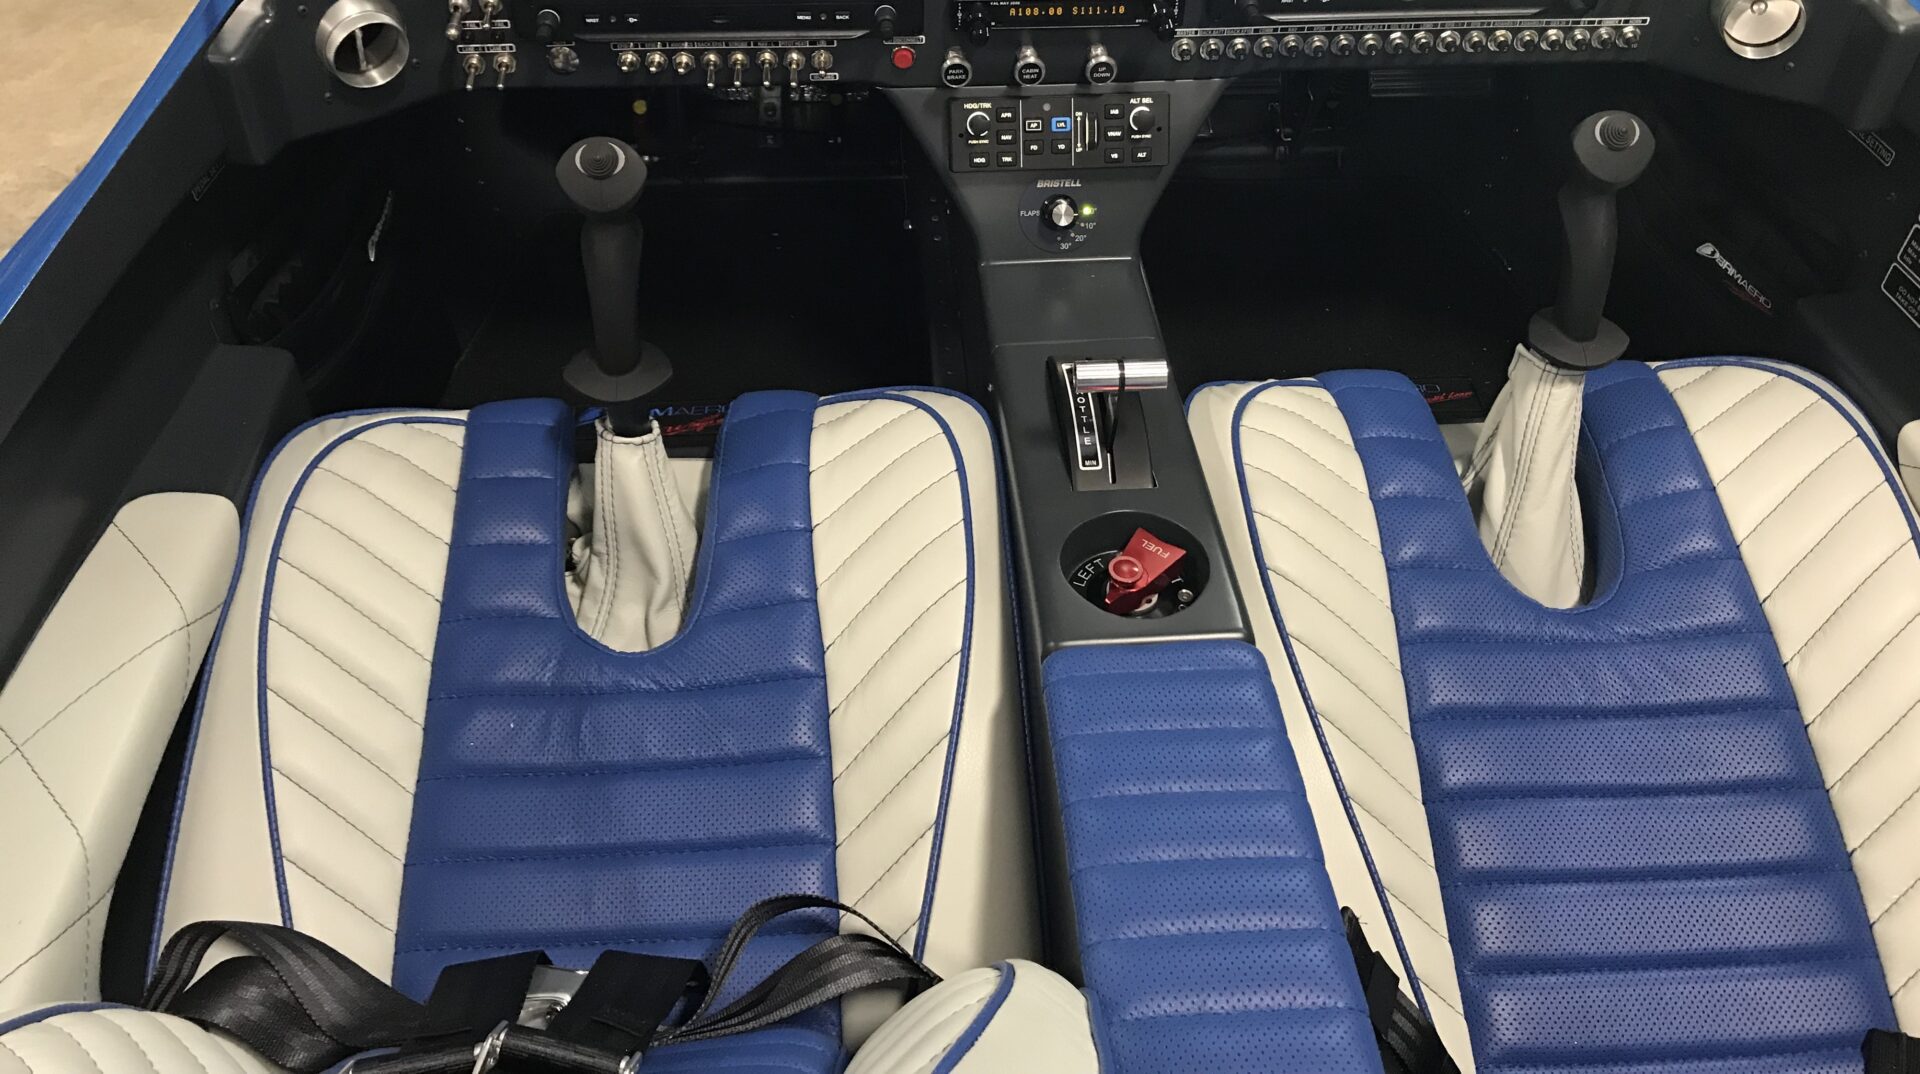 A view of the seats in an airplane.